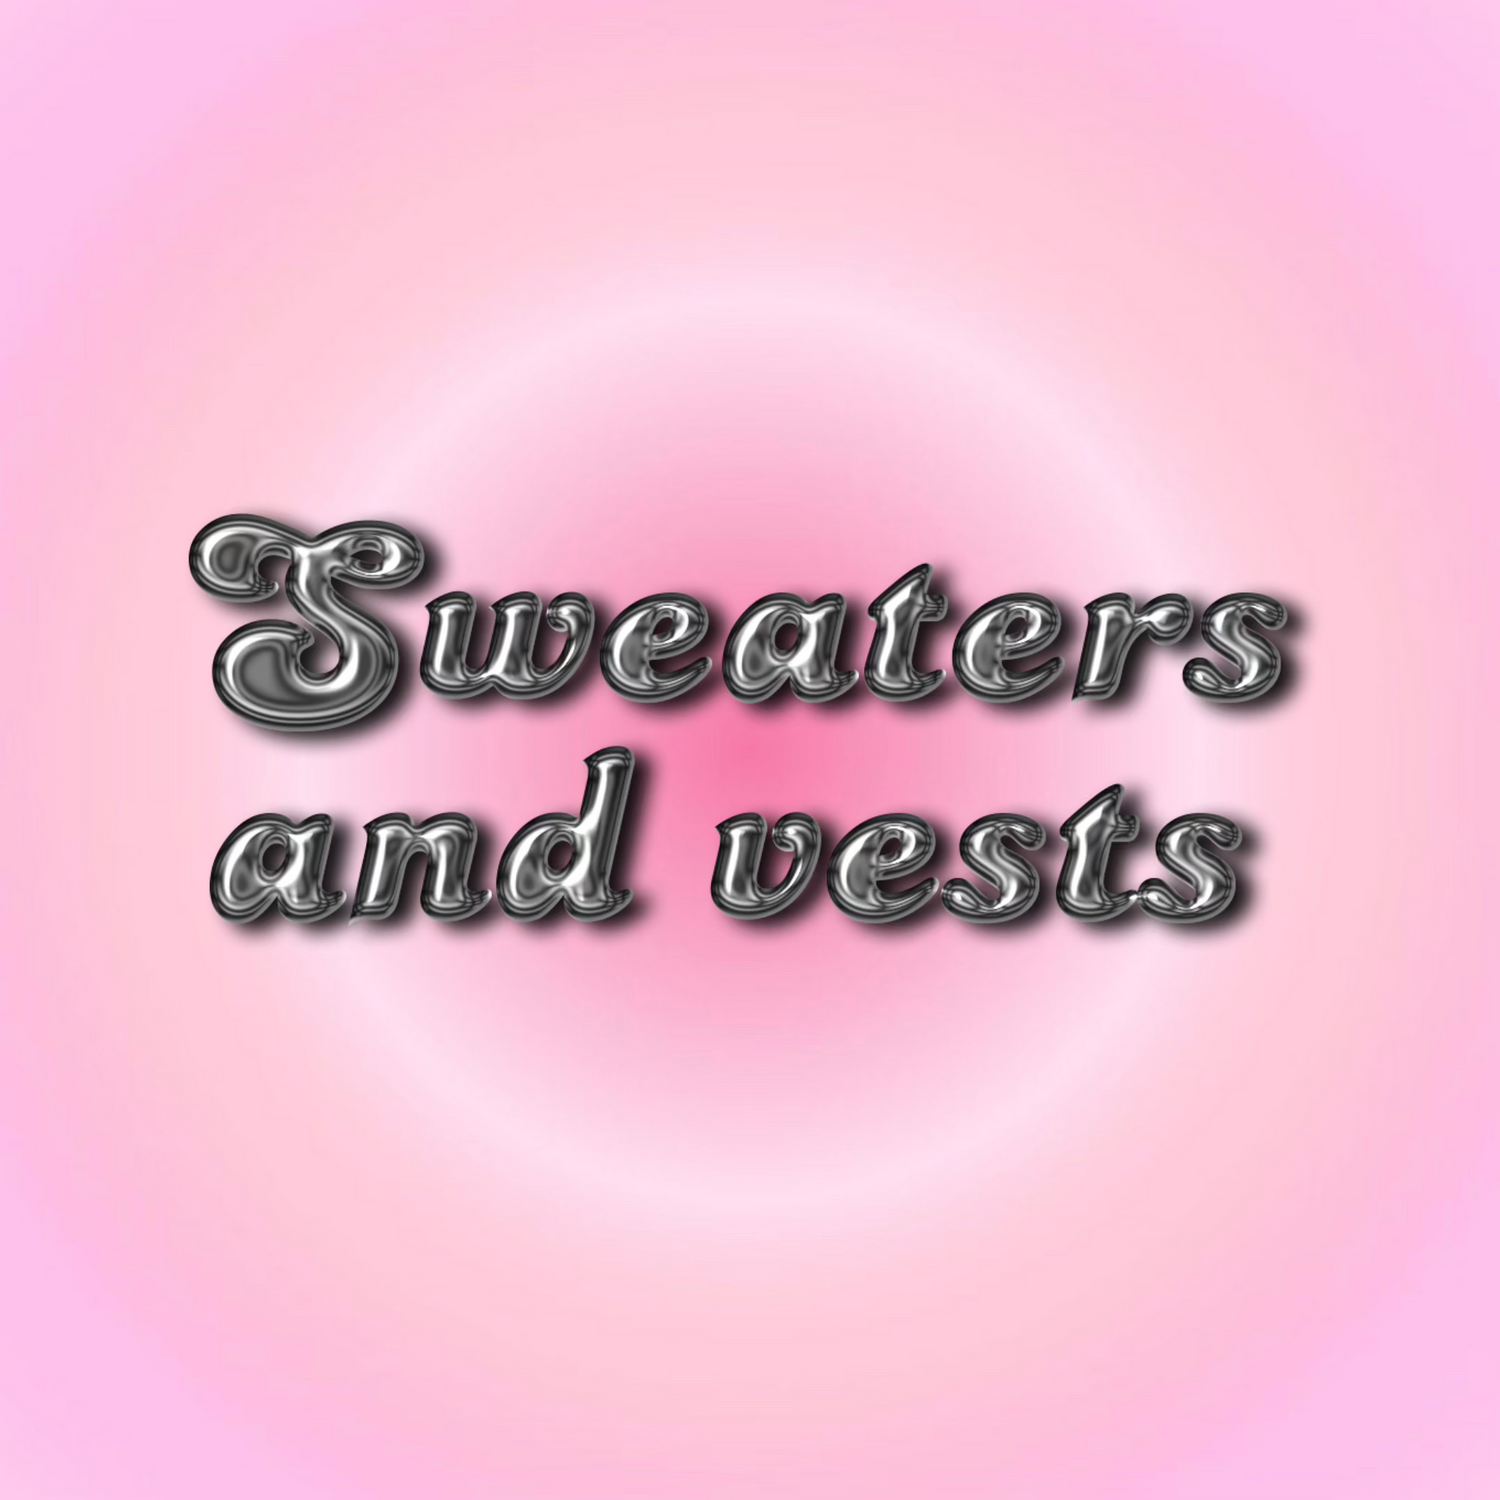 Sweaters and vests